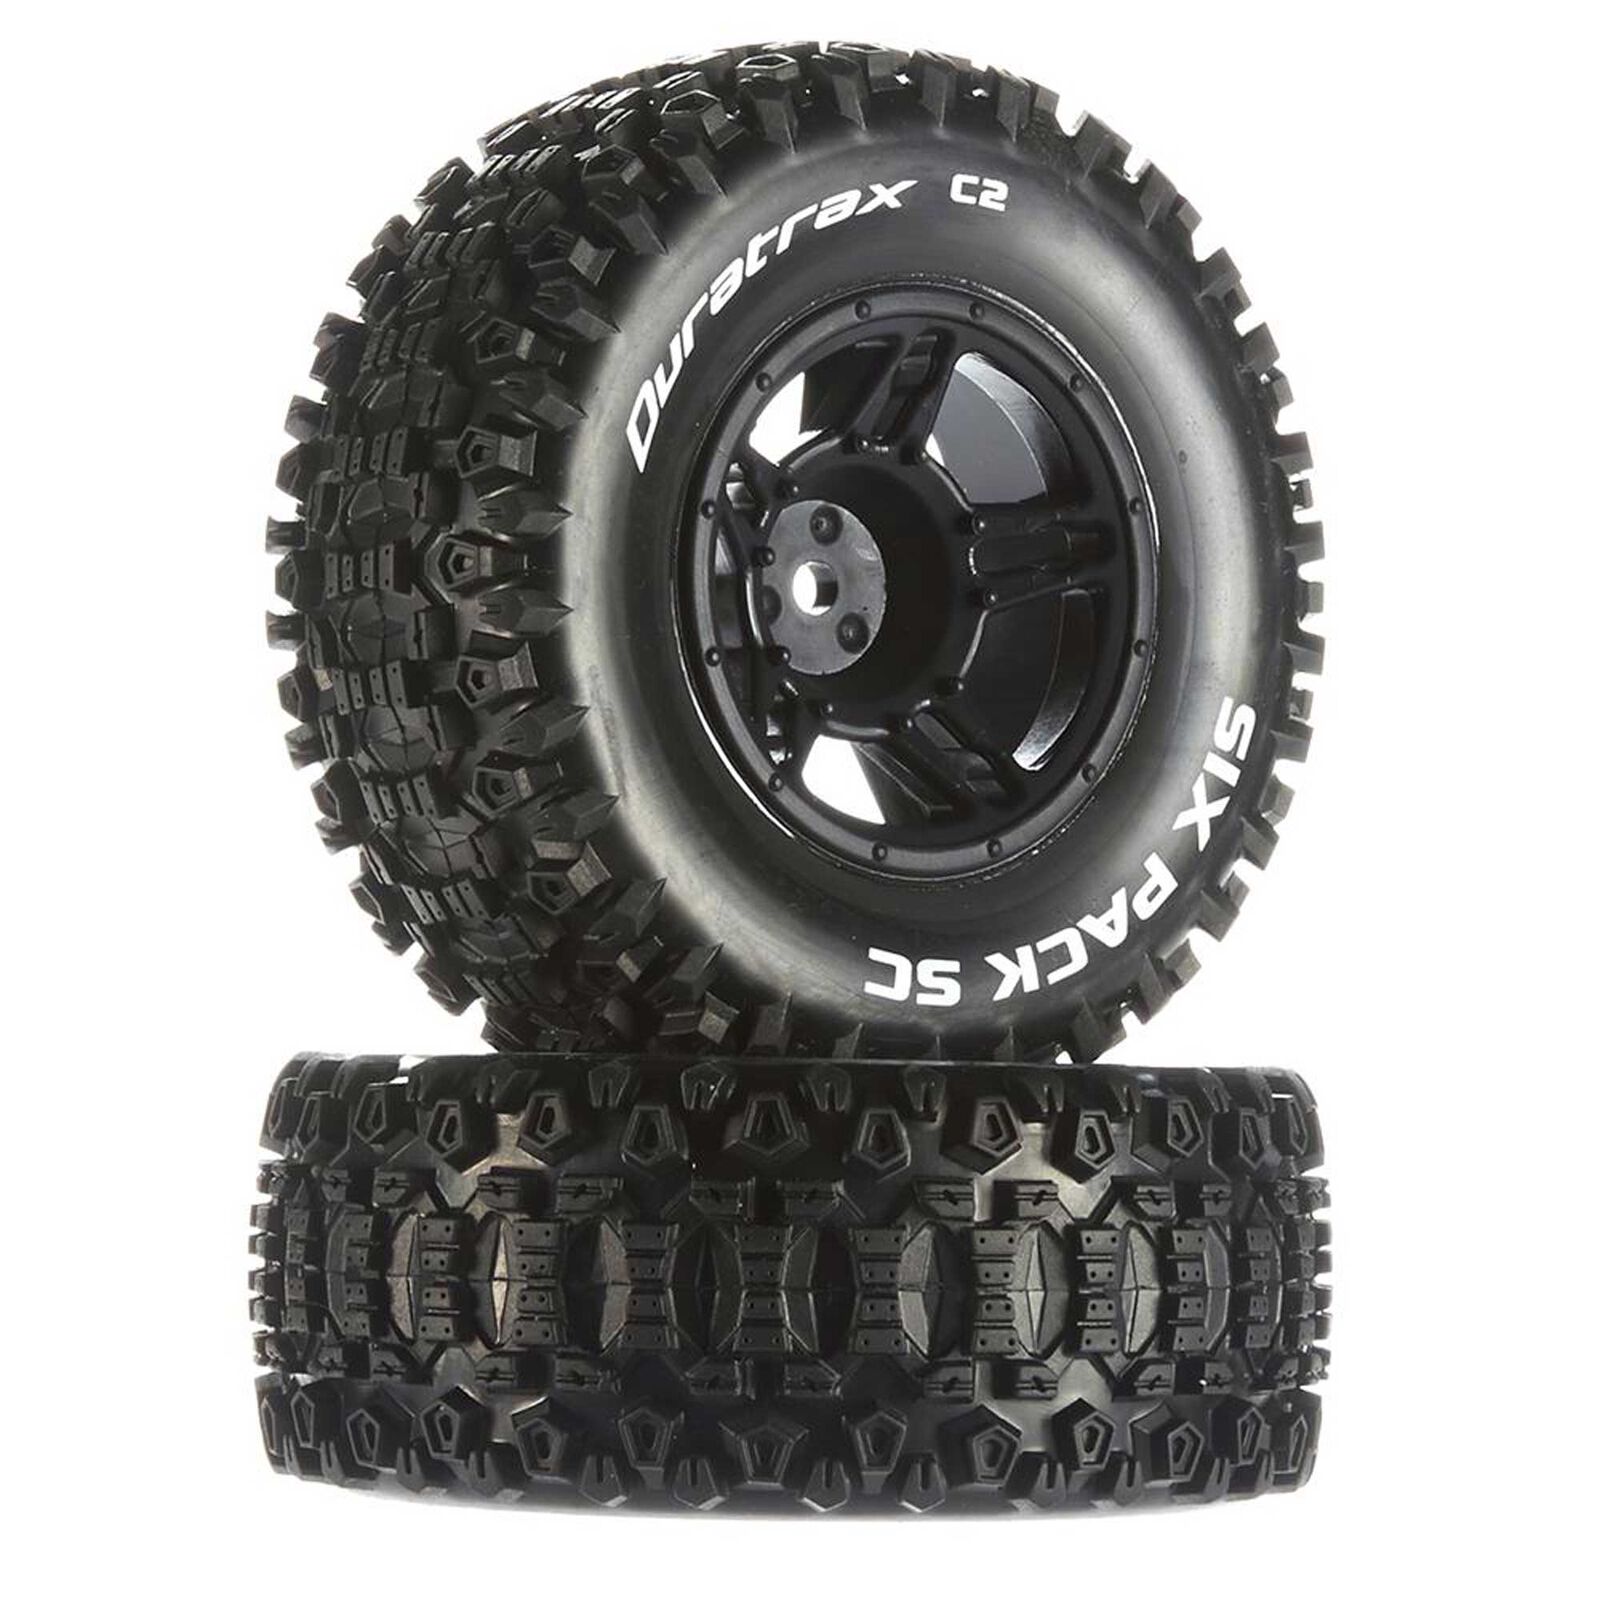 Six-Pack SC C2 Mounted Tires: Traxxas Slash Front (2)